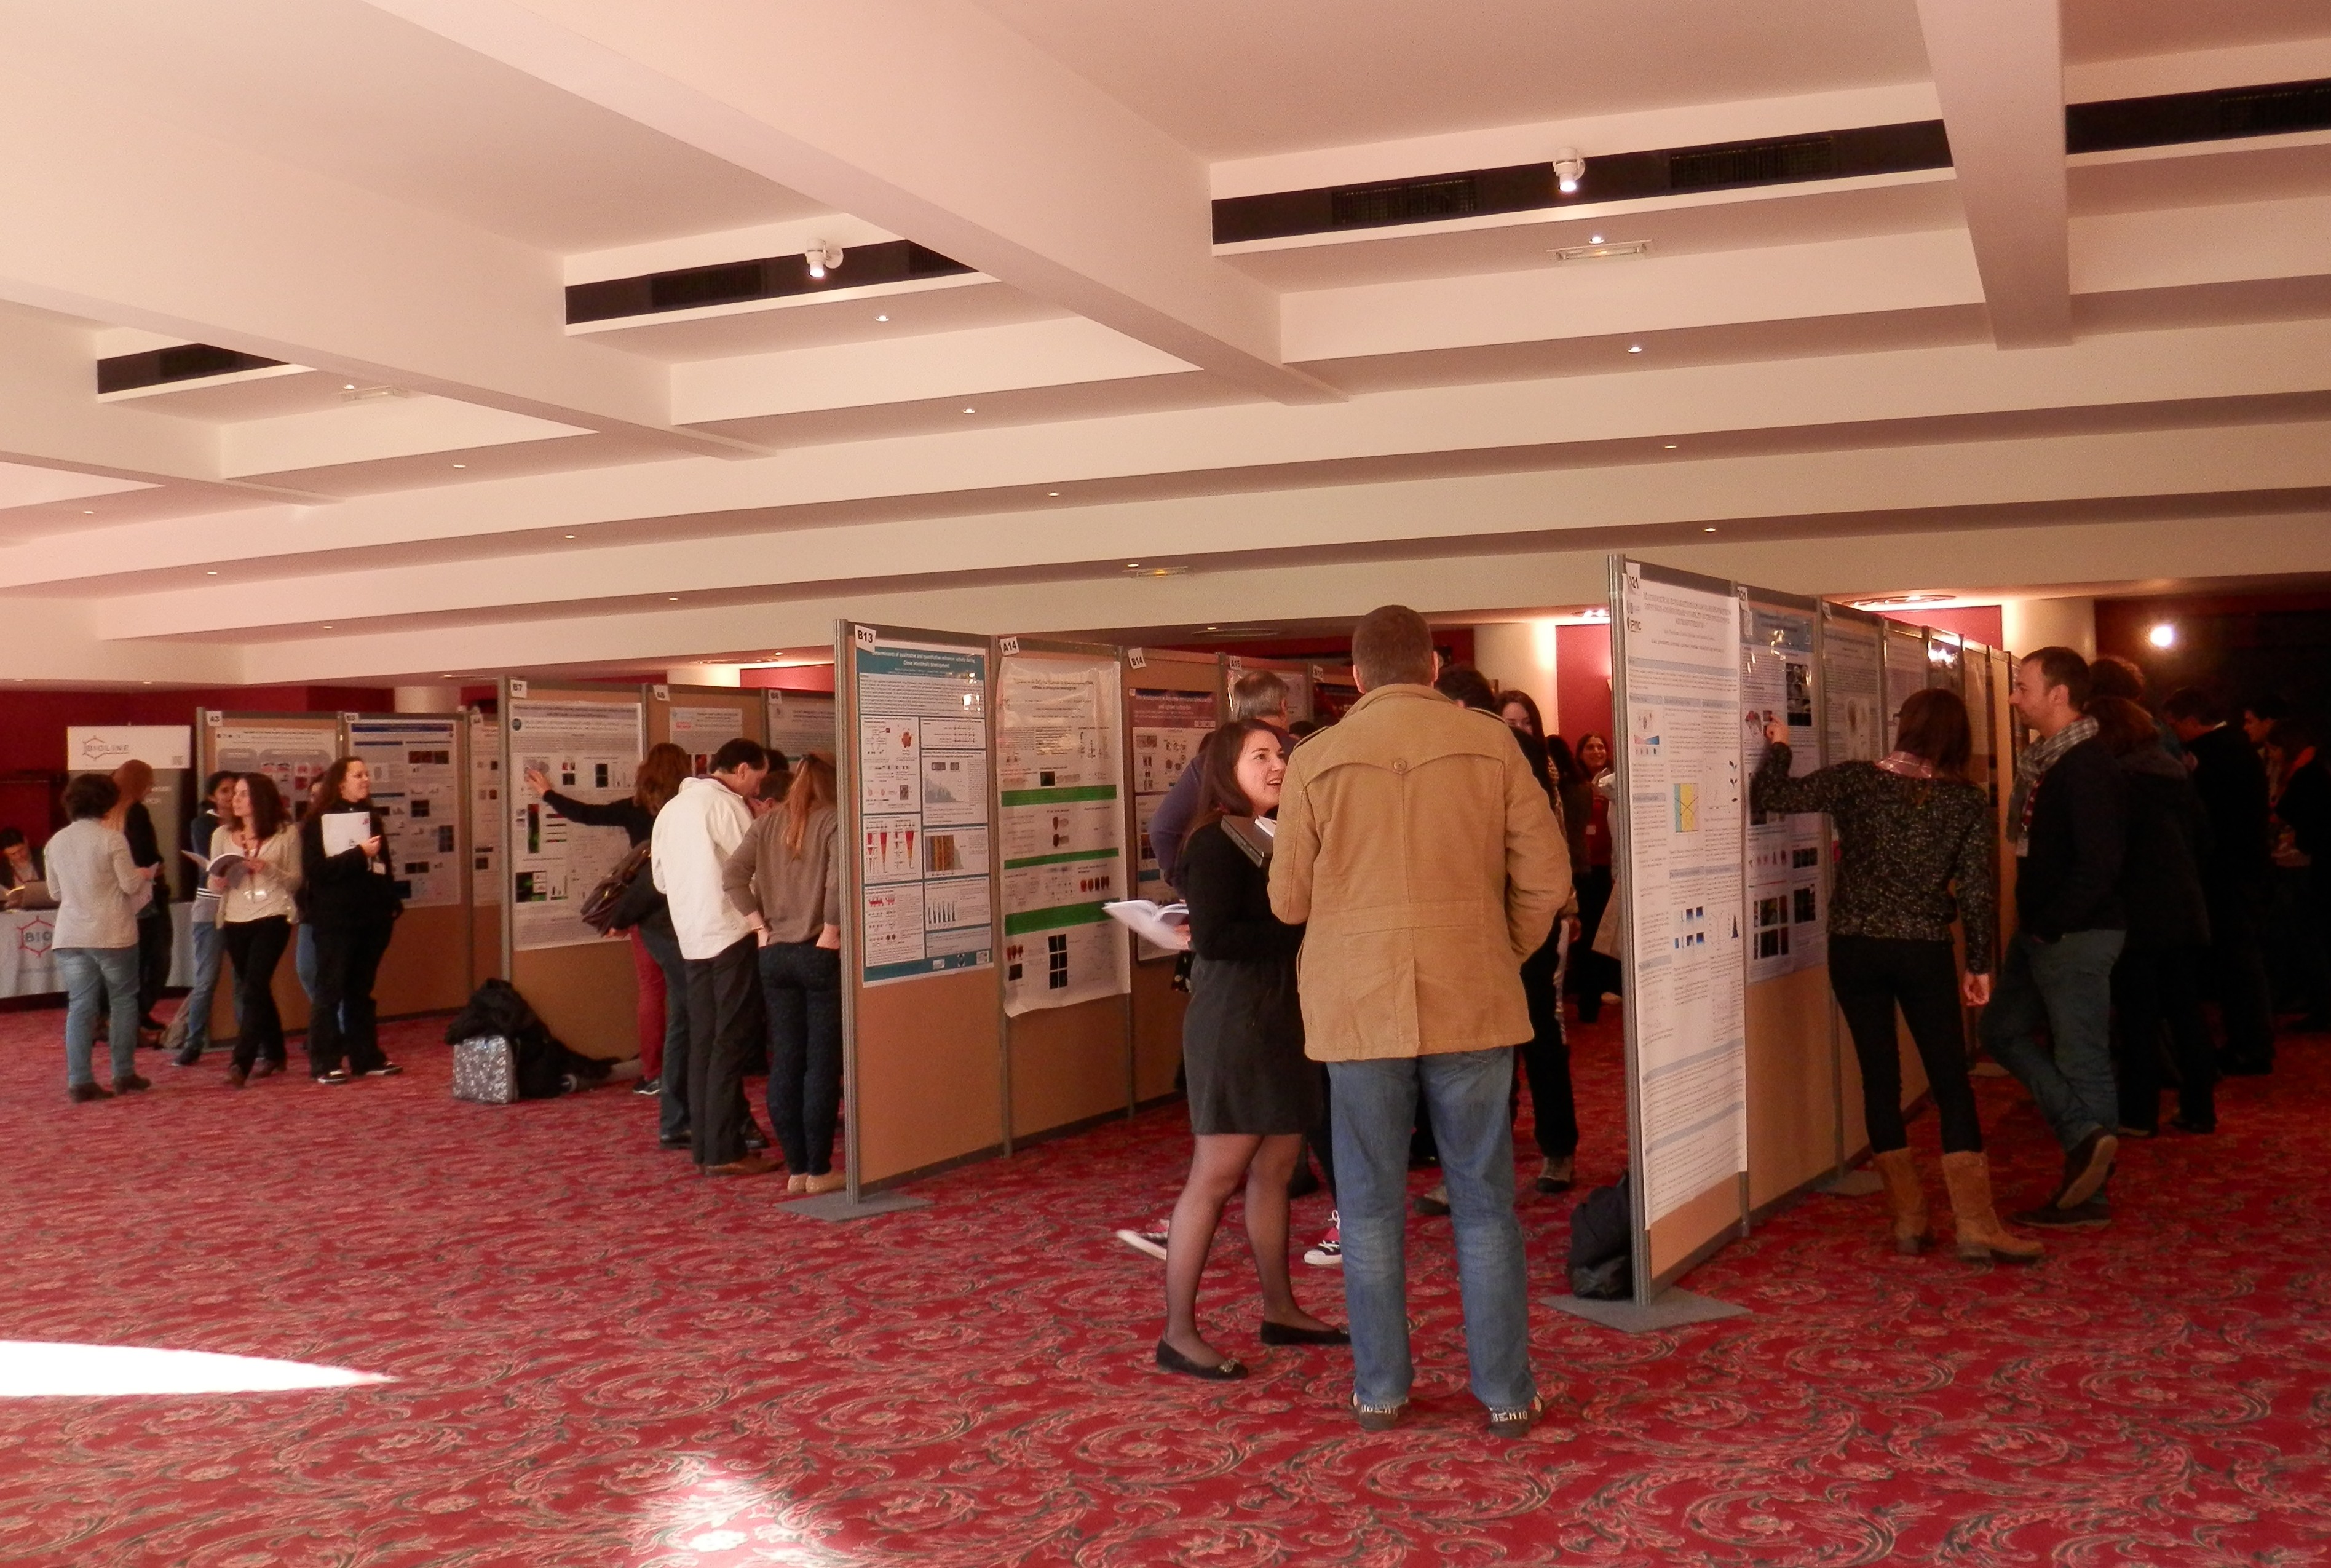 poster session at the SFBD